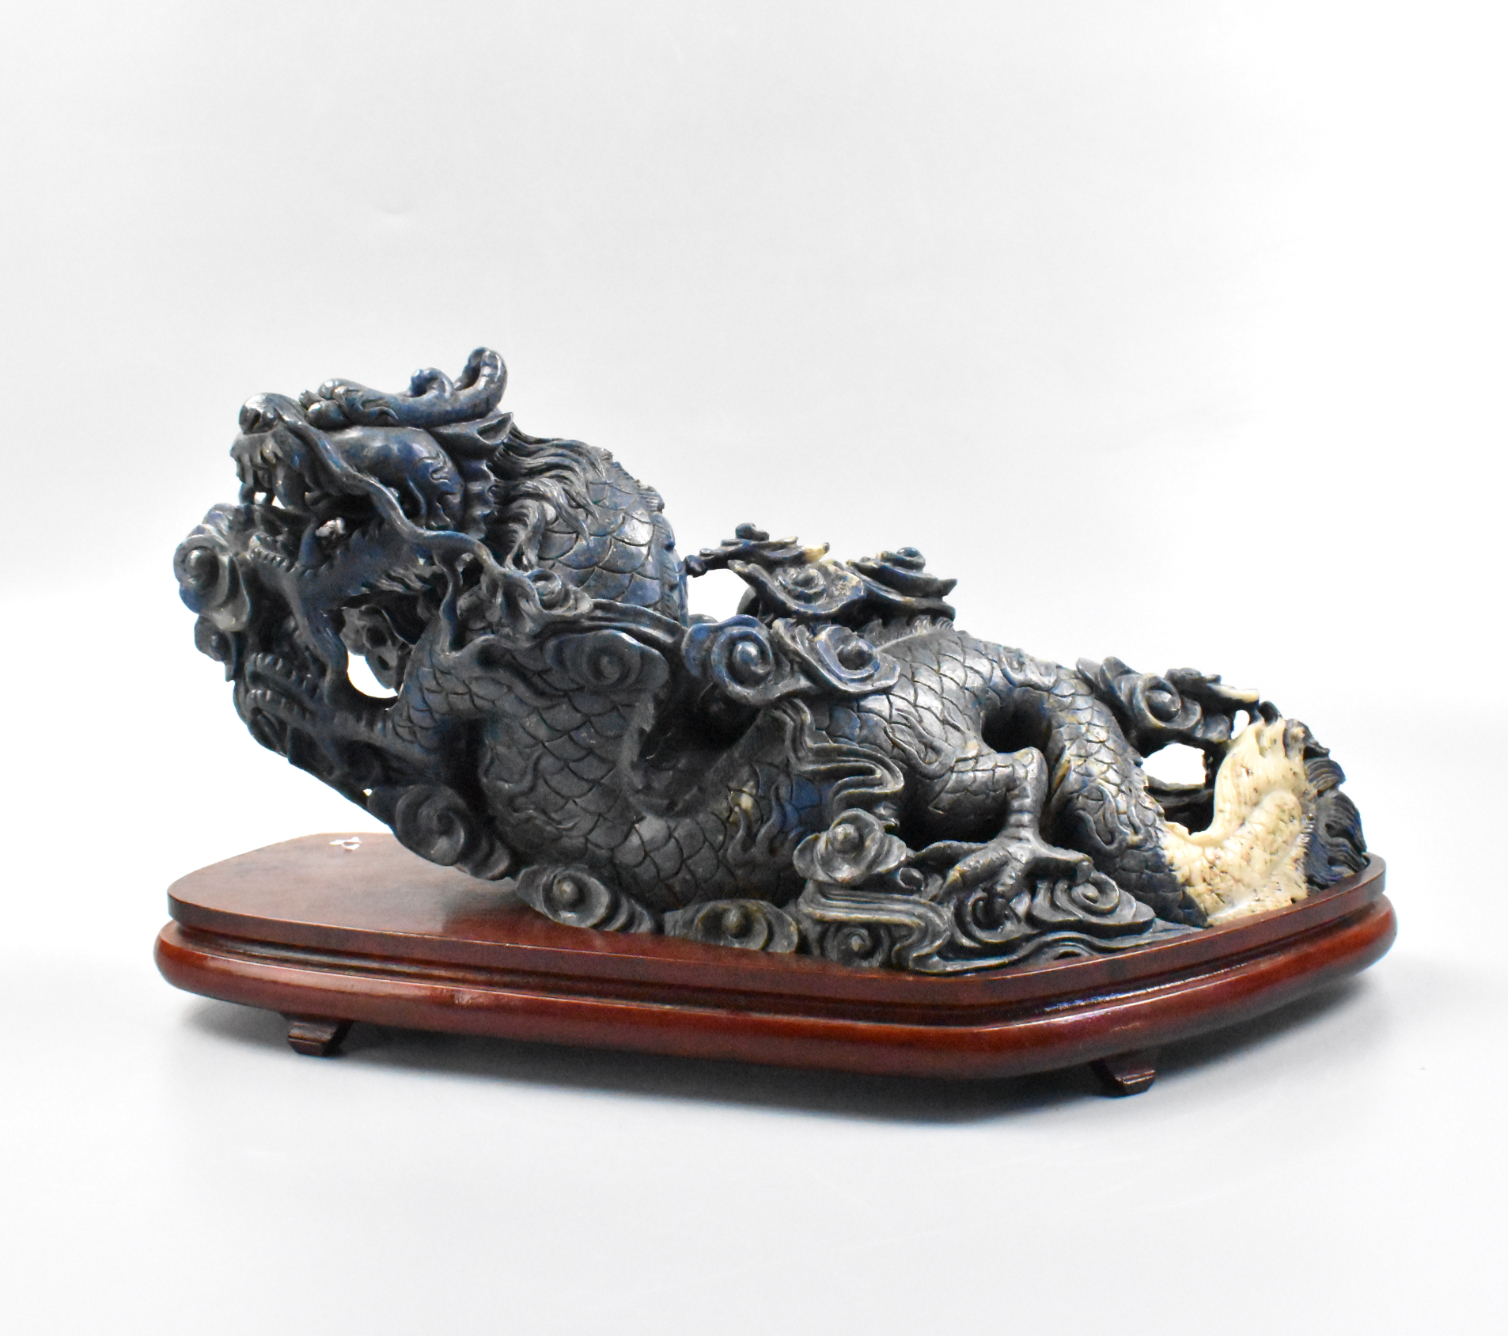 LARGE CHINESE LAPIS DRAGON STATUE 33a824